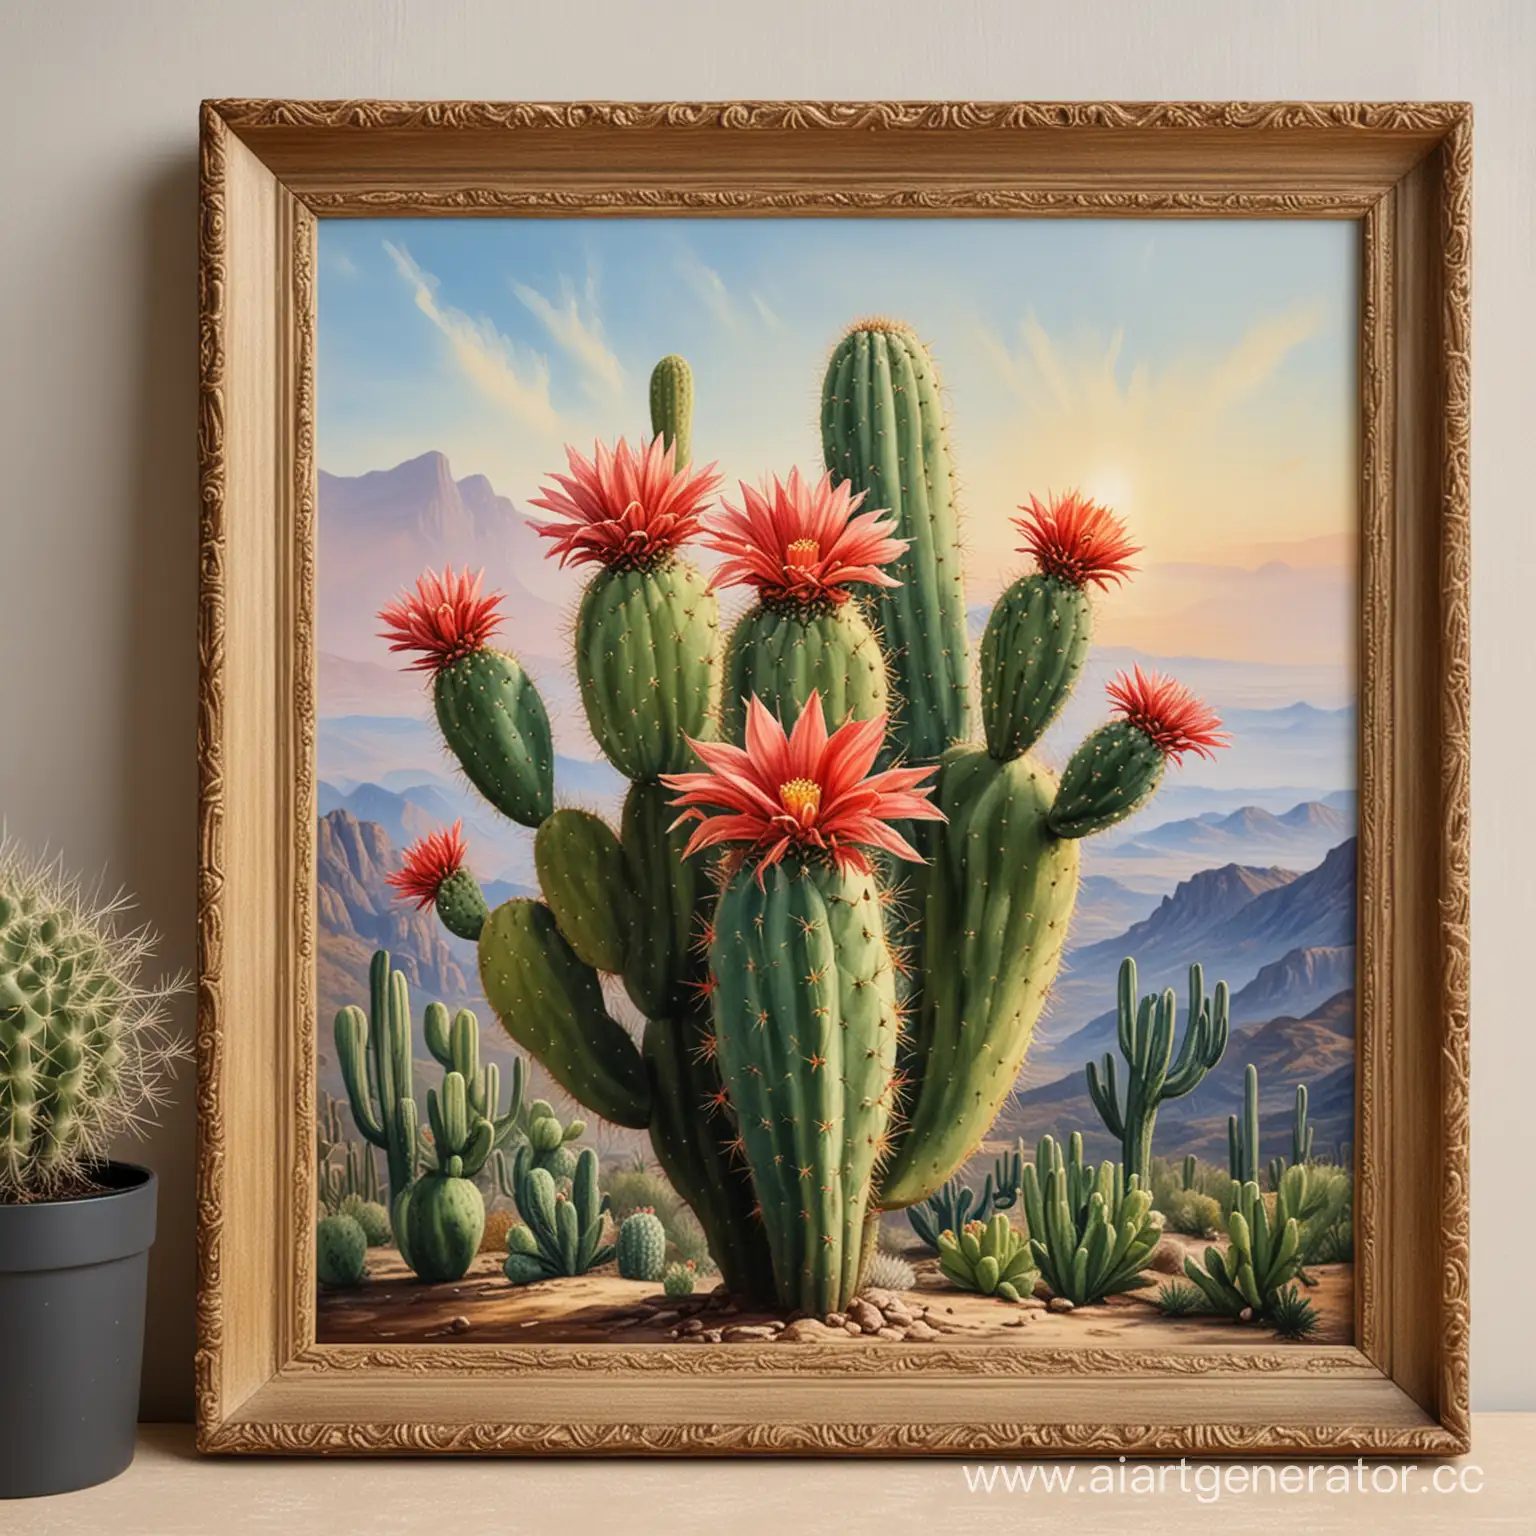 Oil-Painting-of-a-Flourishing-Cactus-in-a-Rustic-Wooden-Frame